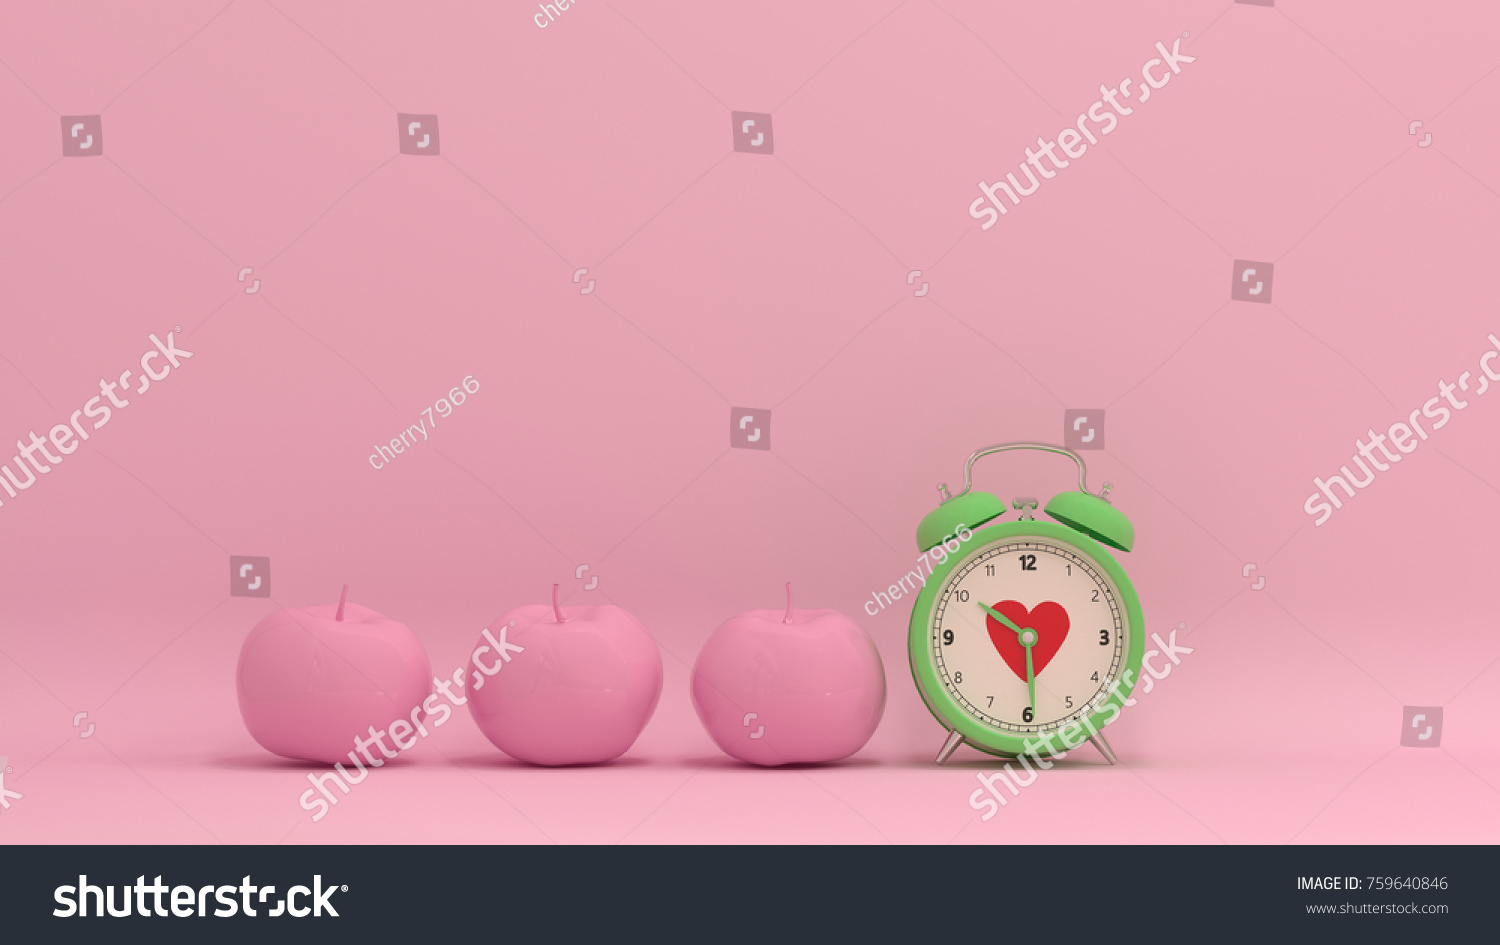 Clock and apple concept on pastel pink background for copy space minimal fruit and object concept pastel colorful. #759640846